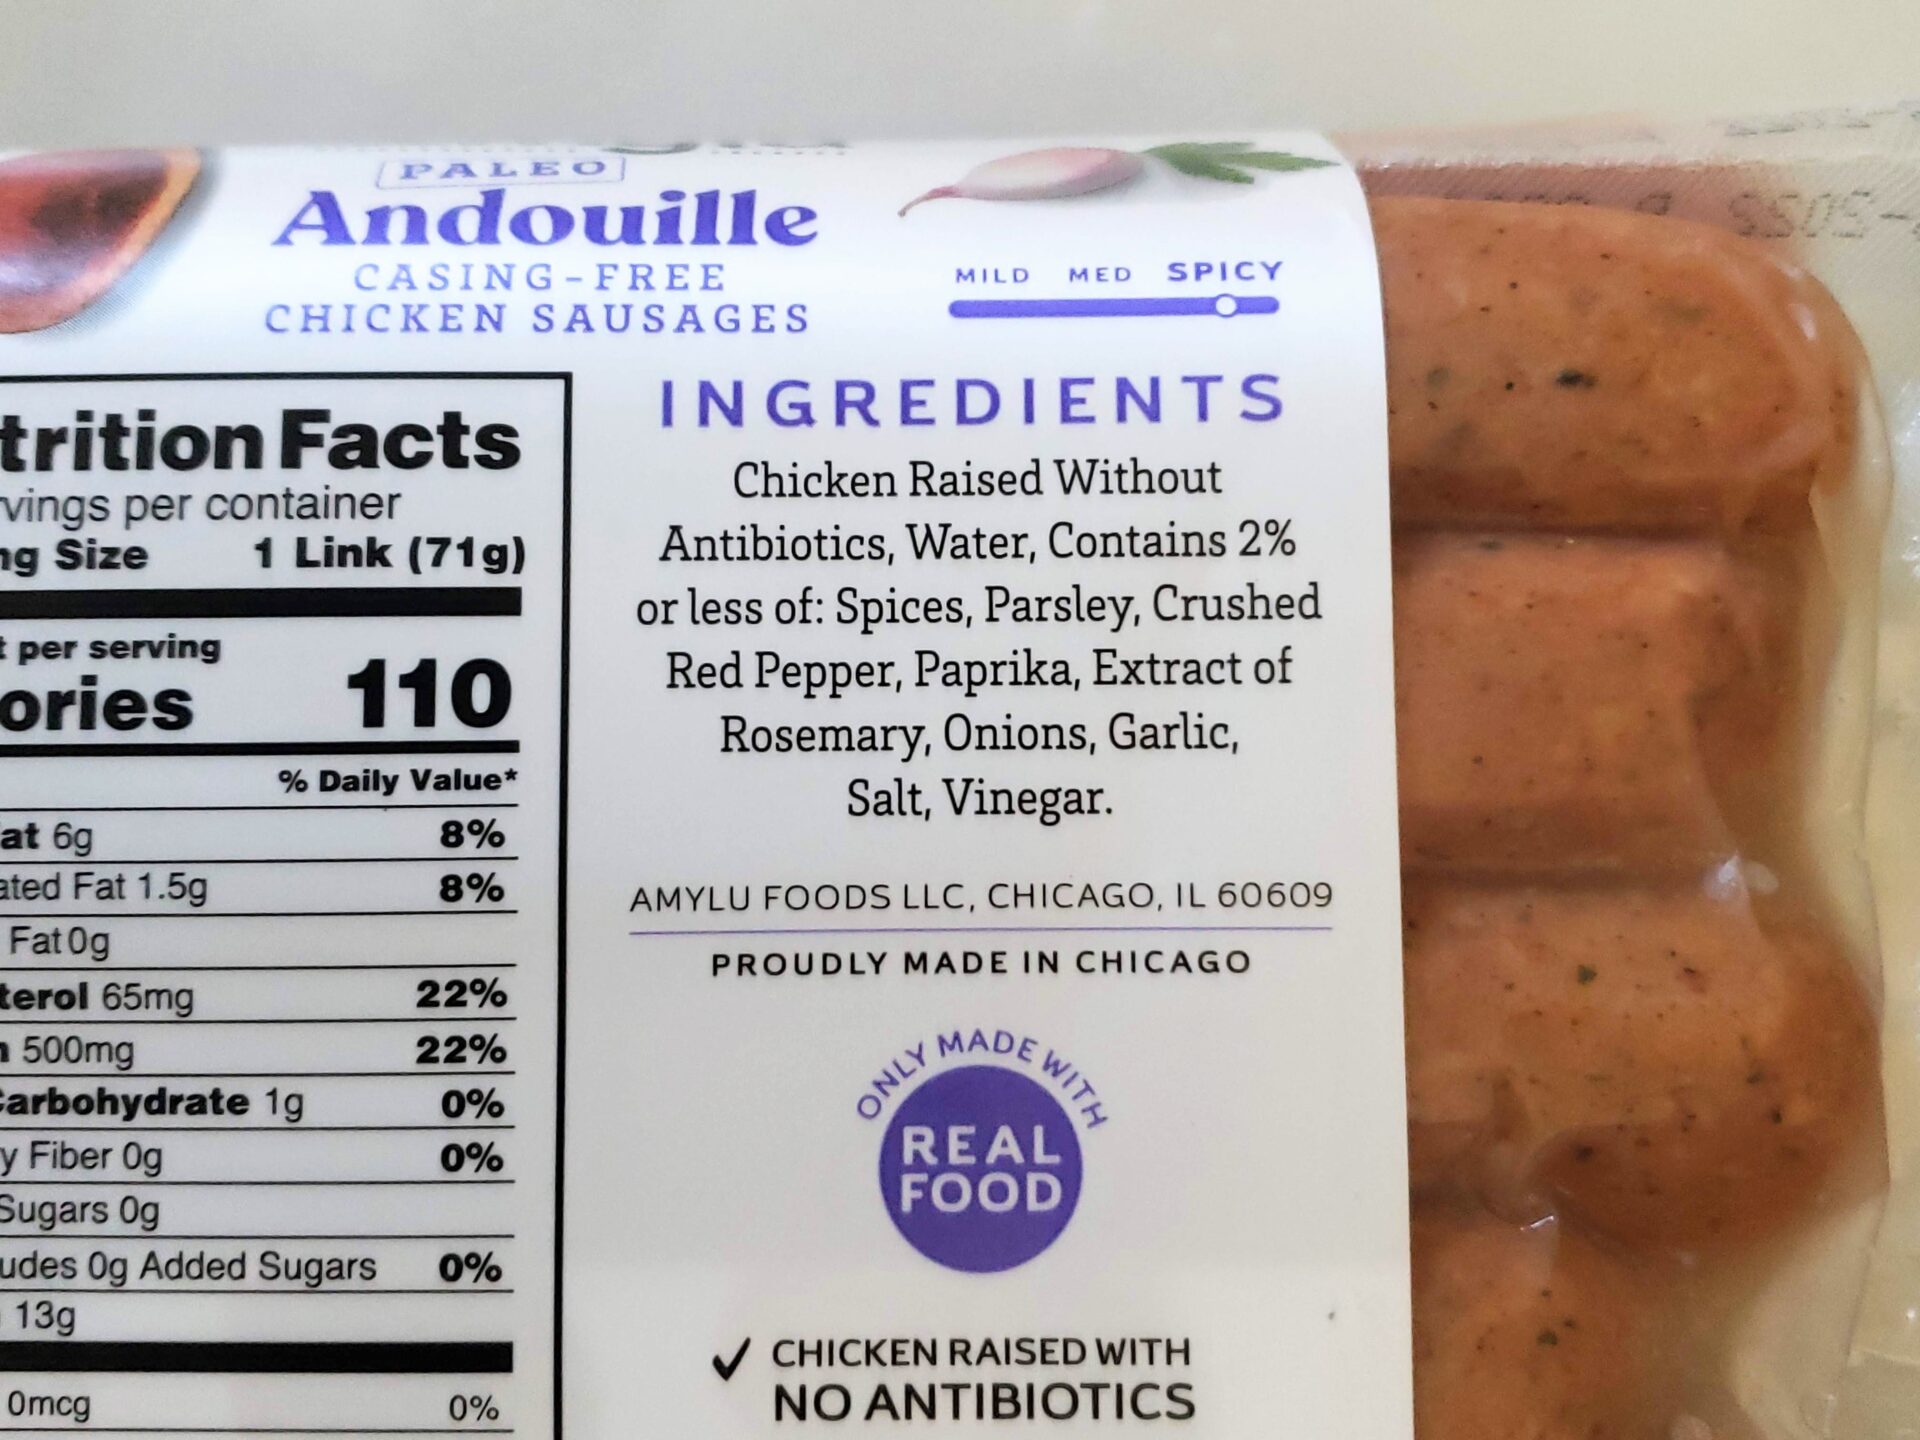 Great-Ingredients-Andouille-Sausage